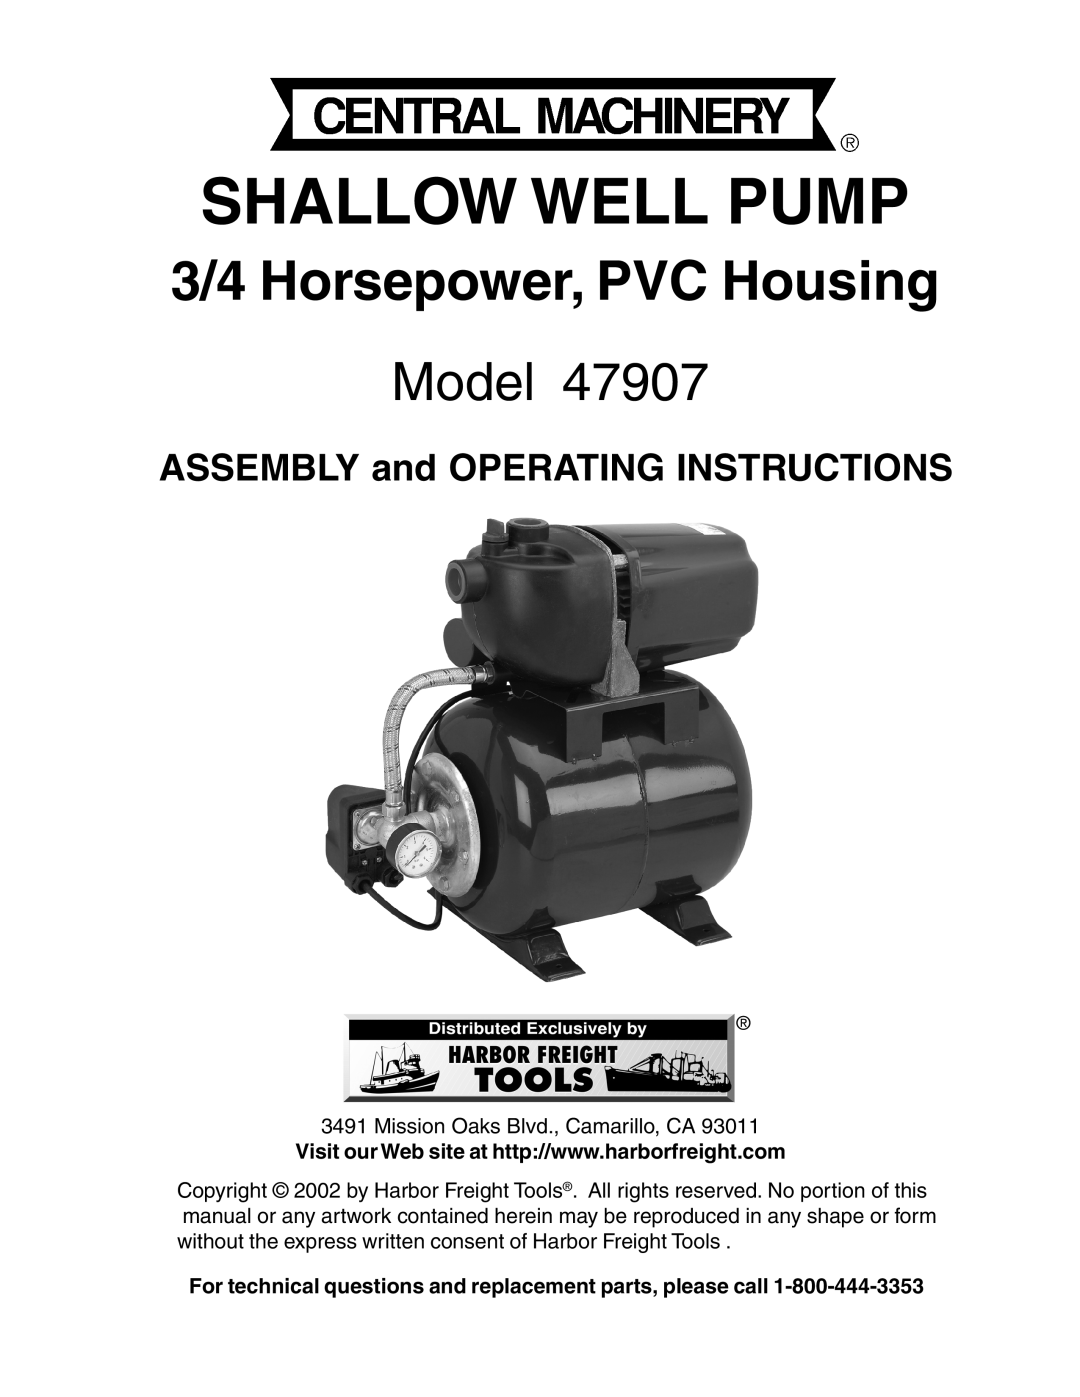 Harbor Freight Tools 47907 operating instructions Shallow Well Pump, 3/4 Horsepower, PVC Housing, Model 